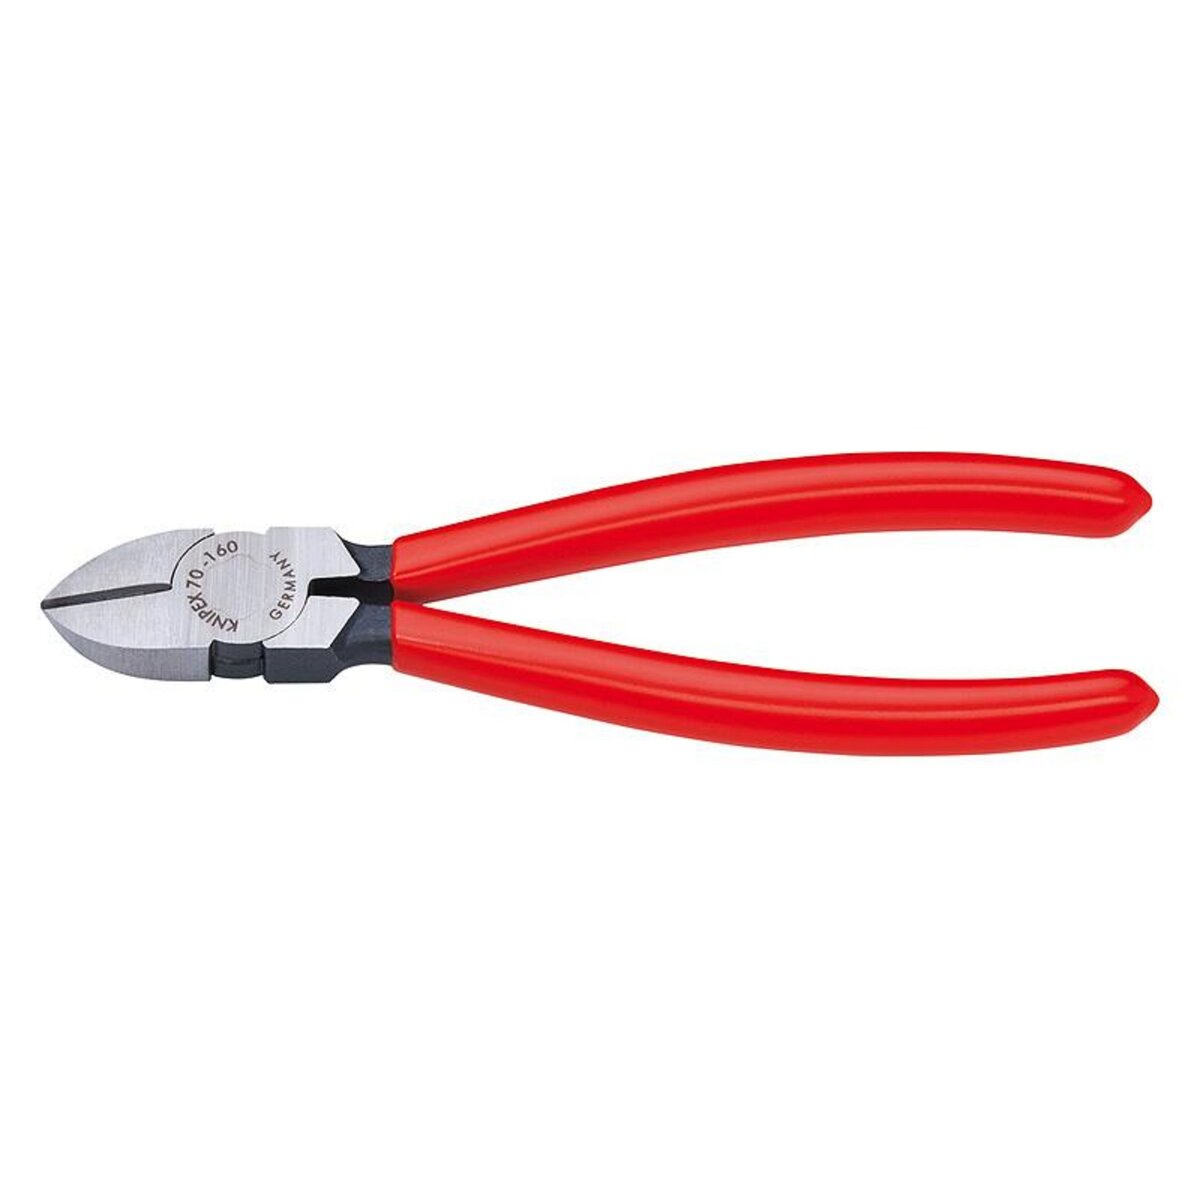 Pince coupante 160 mm - Knipex